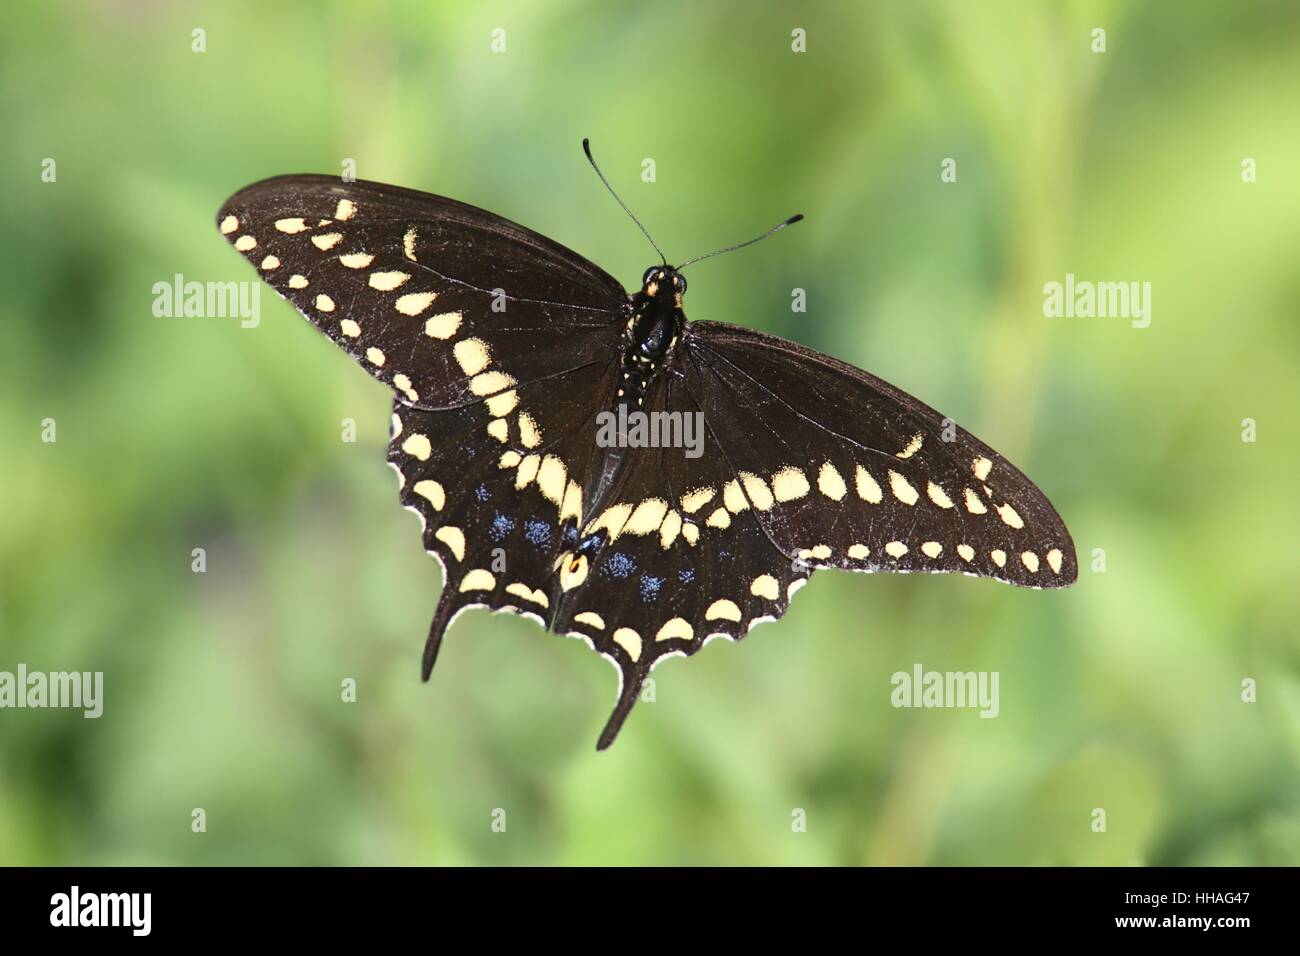 butterfly, swallowtail, animal, insects, wild, butterfly, black, swarthy, Stock Photo